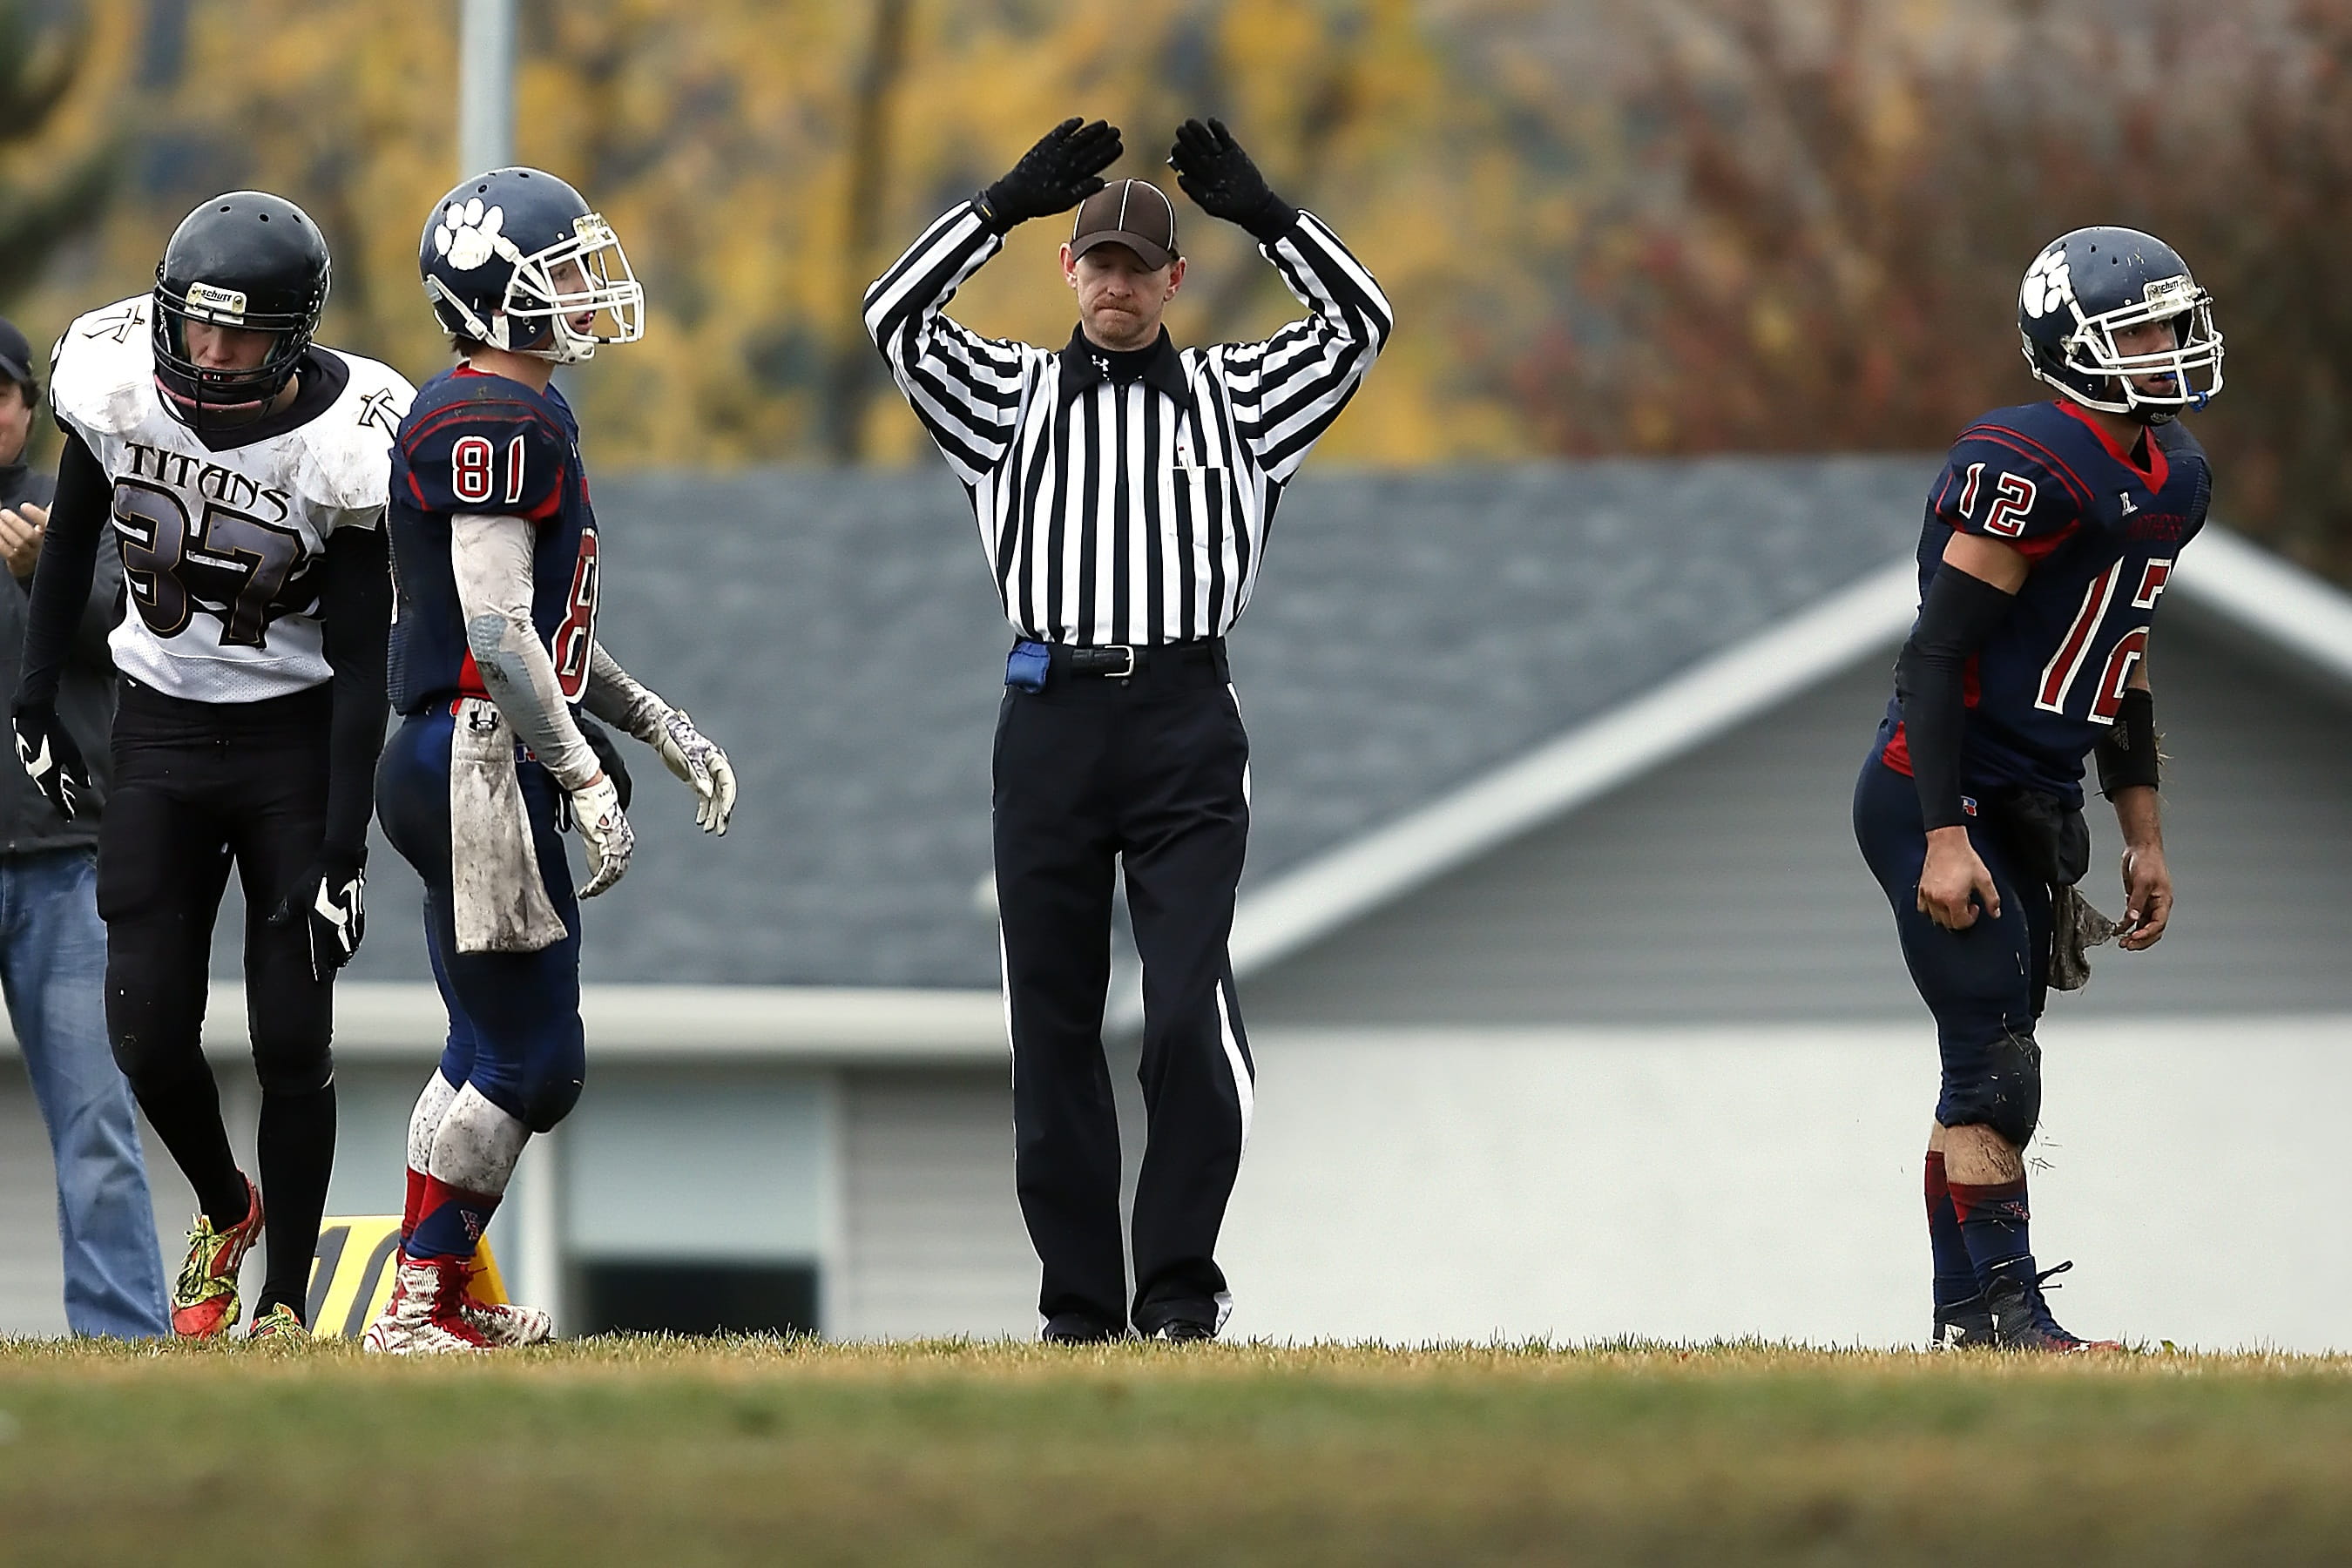 Referee Between 3 Football Player, action, adult, American football